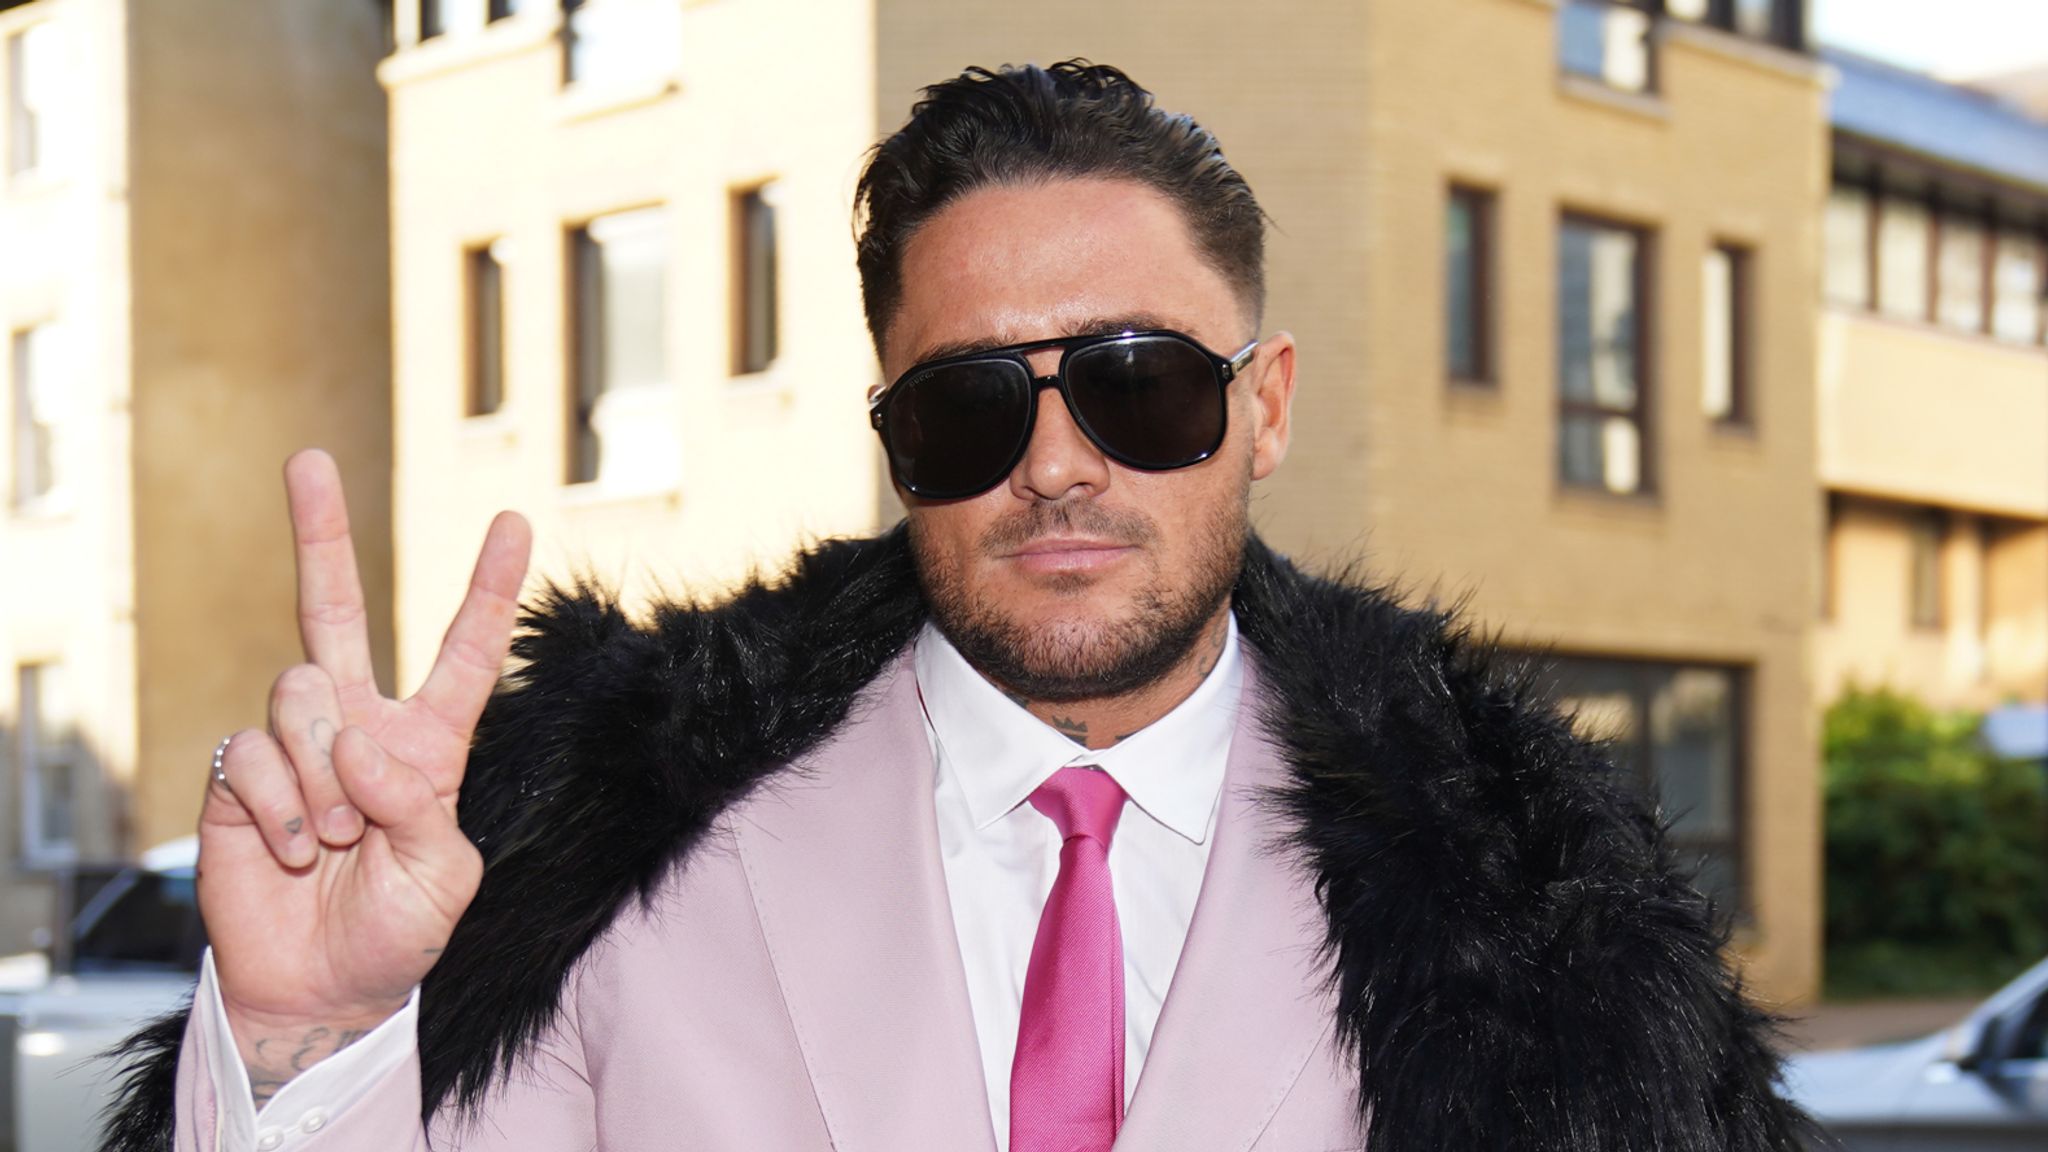 Stephen Bear Reality TV star on trial accused of sharing garden sex tape on OnlyFans Ents and Arts News Sky News picture photo